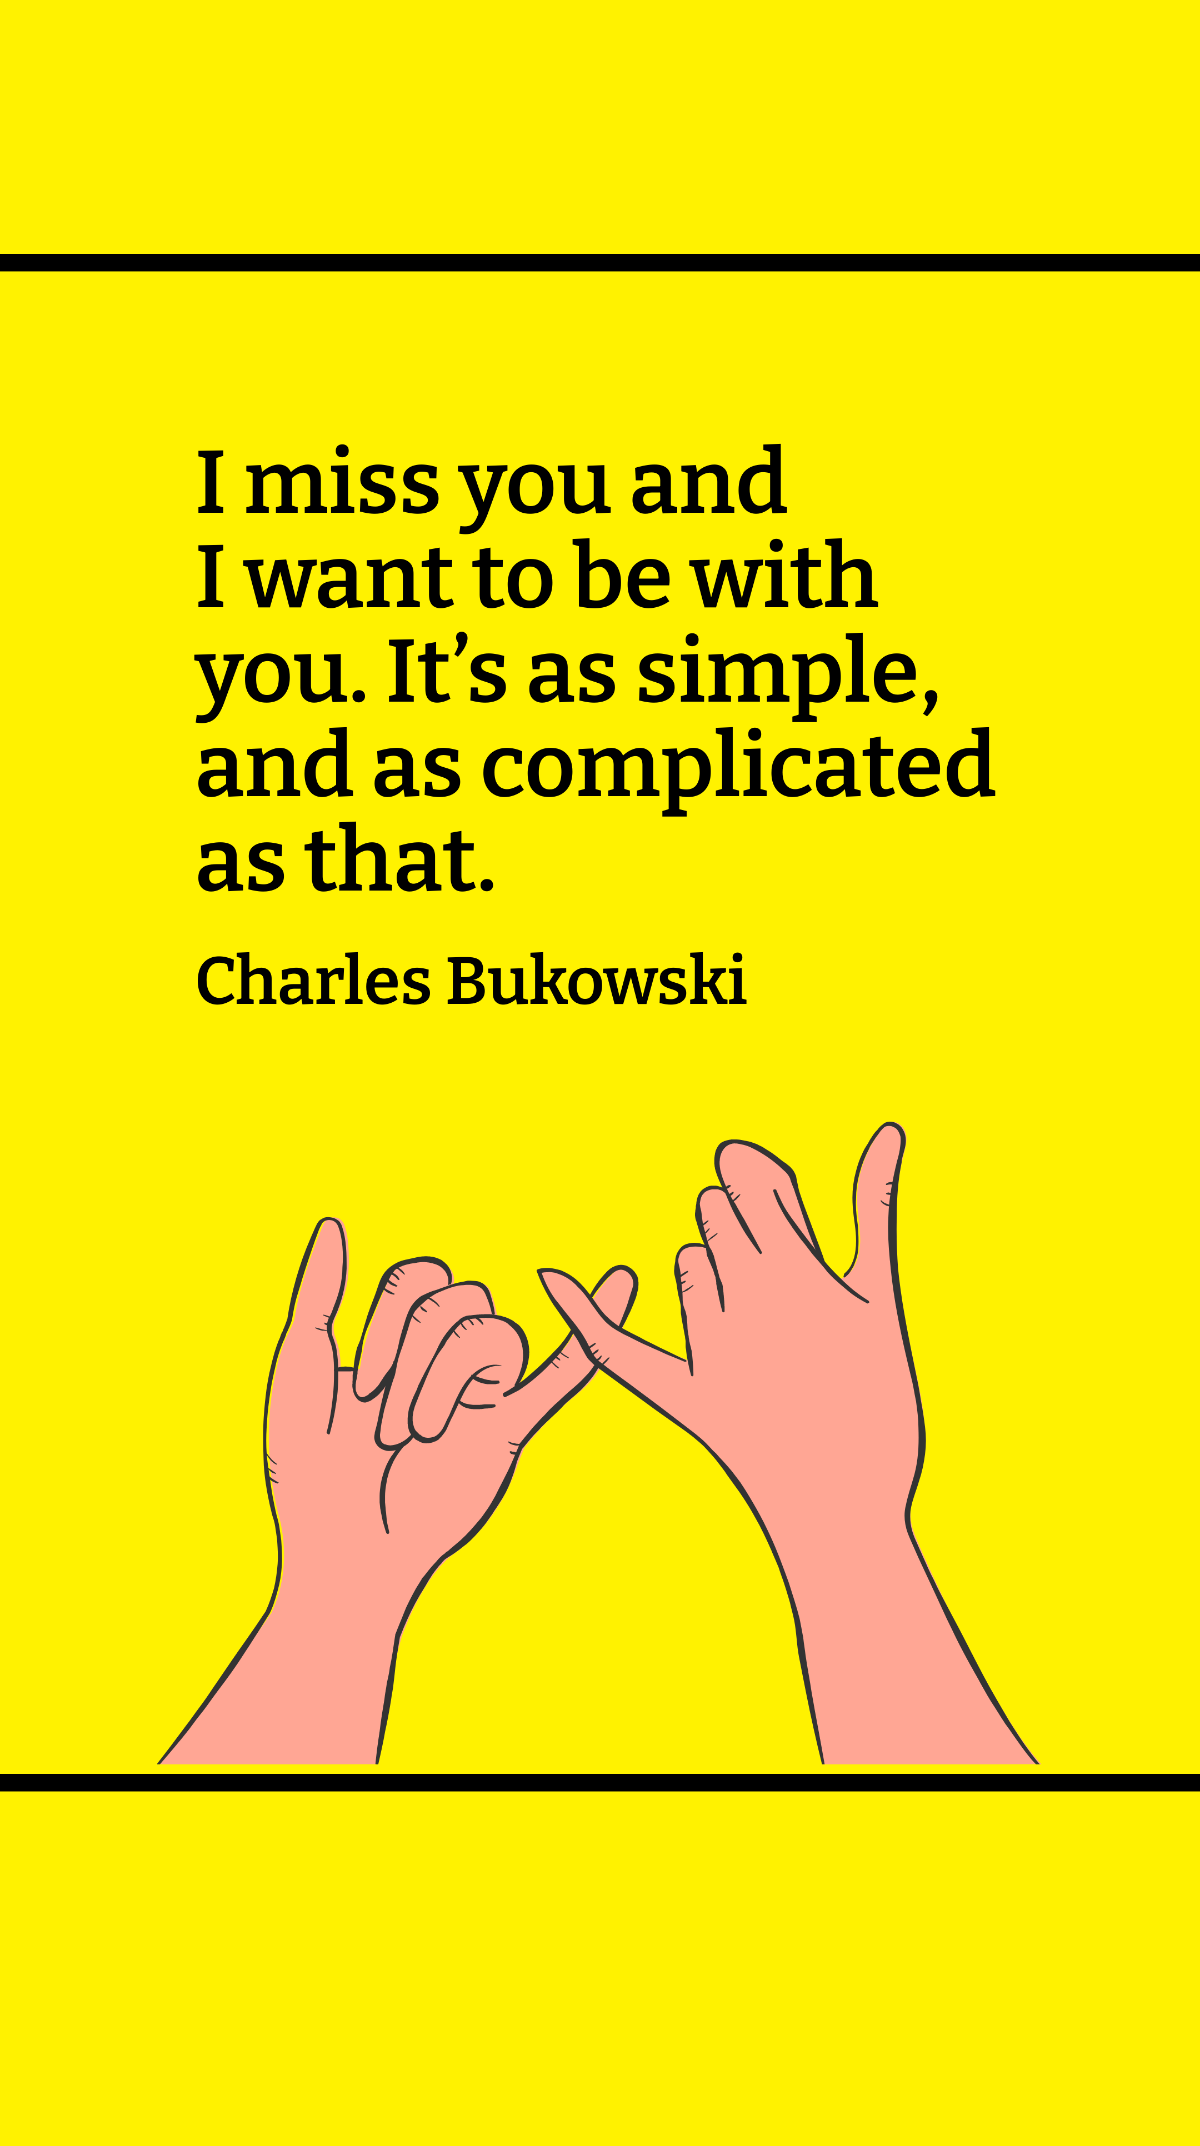 Charles Bukowski - I miss you and I want to be with you. It’s as simple, and as complicated as that. Template